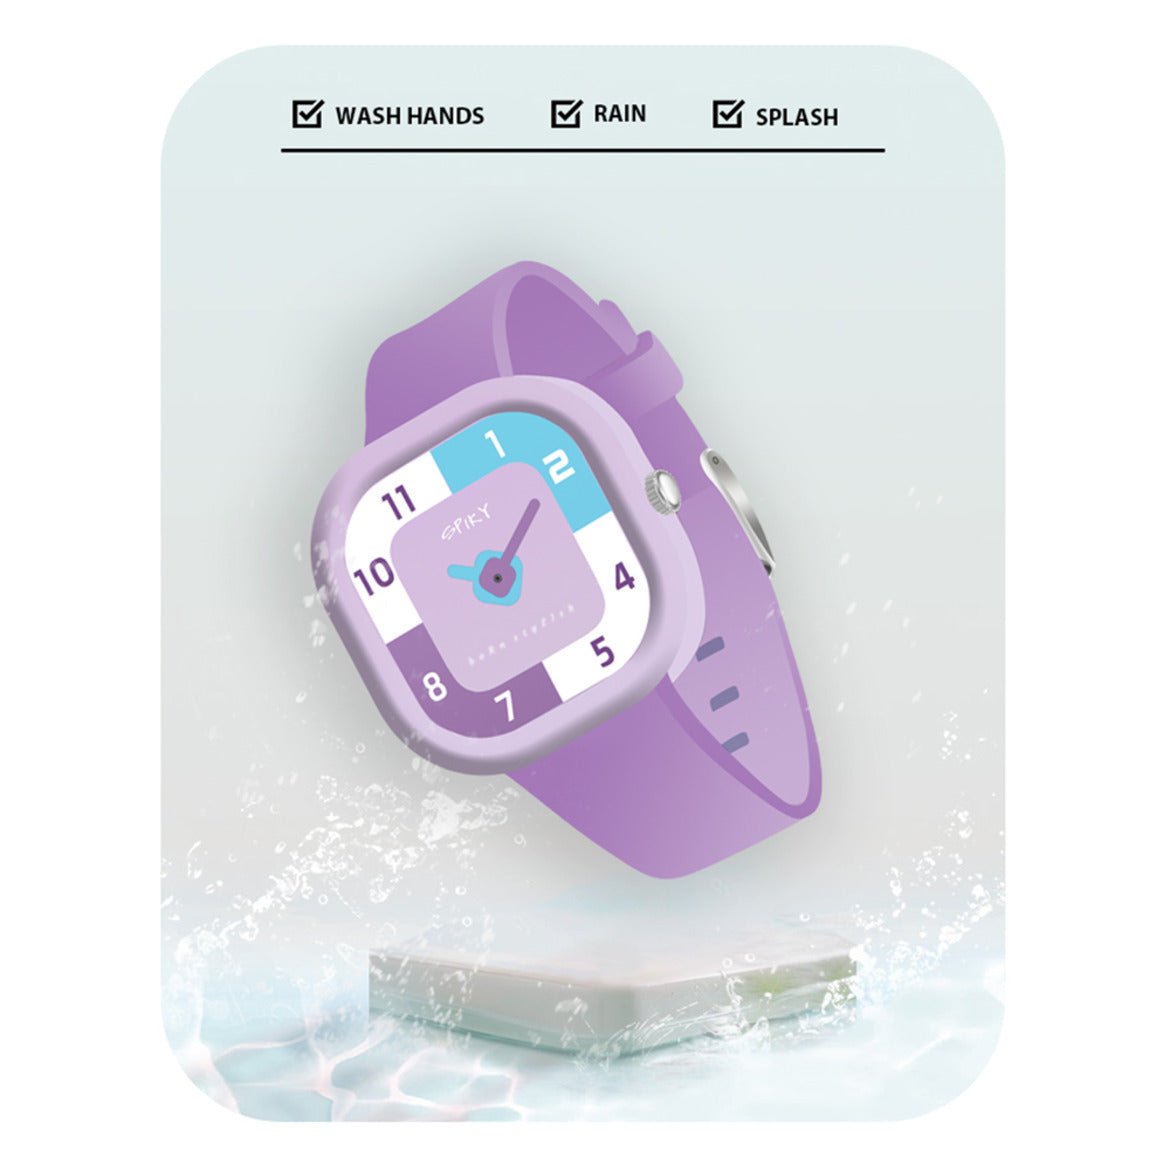 Spiky Square Analog Watch for Kids - Blue